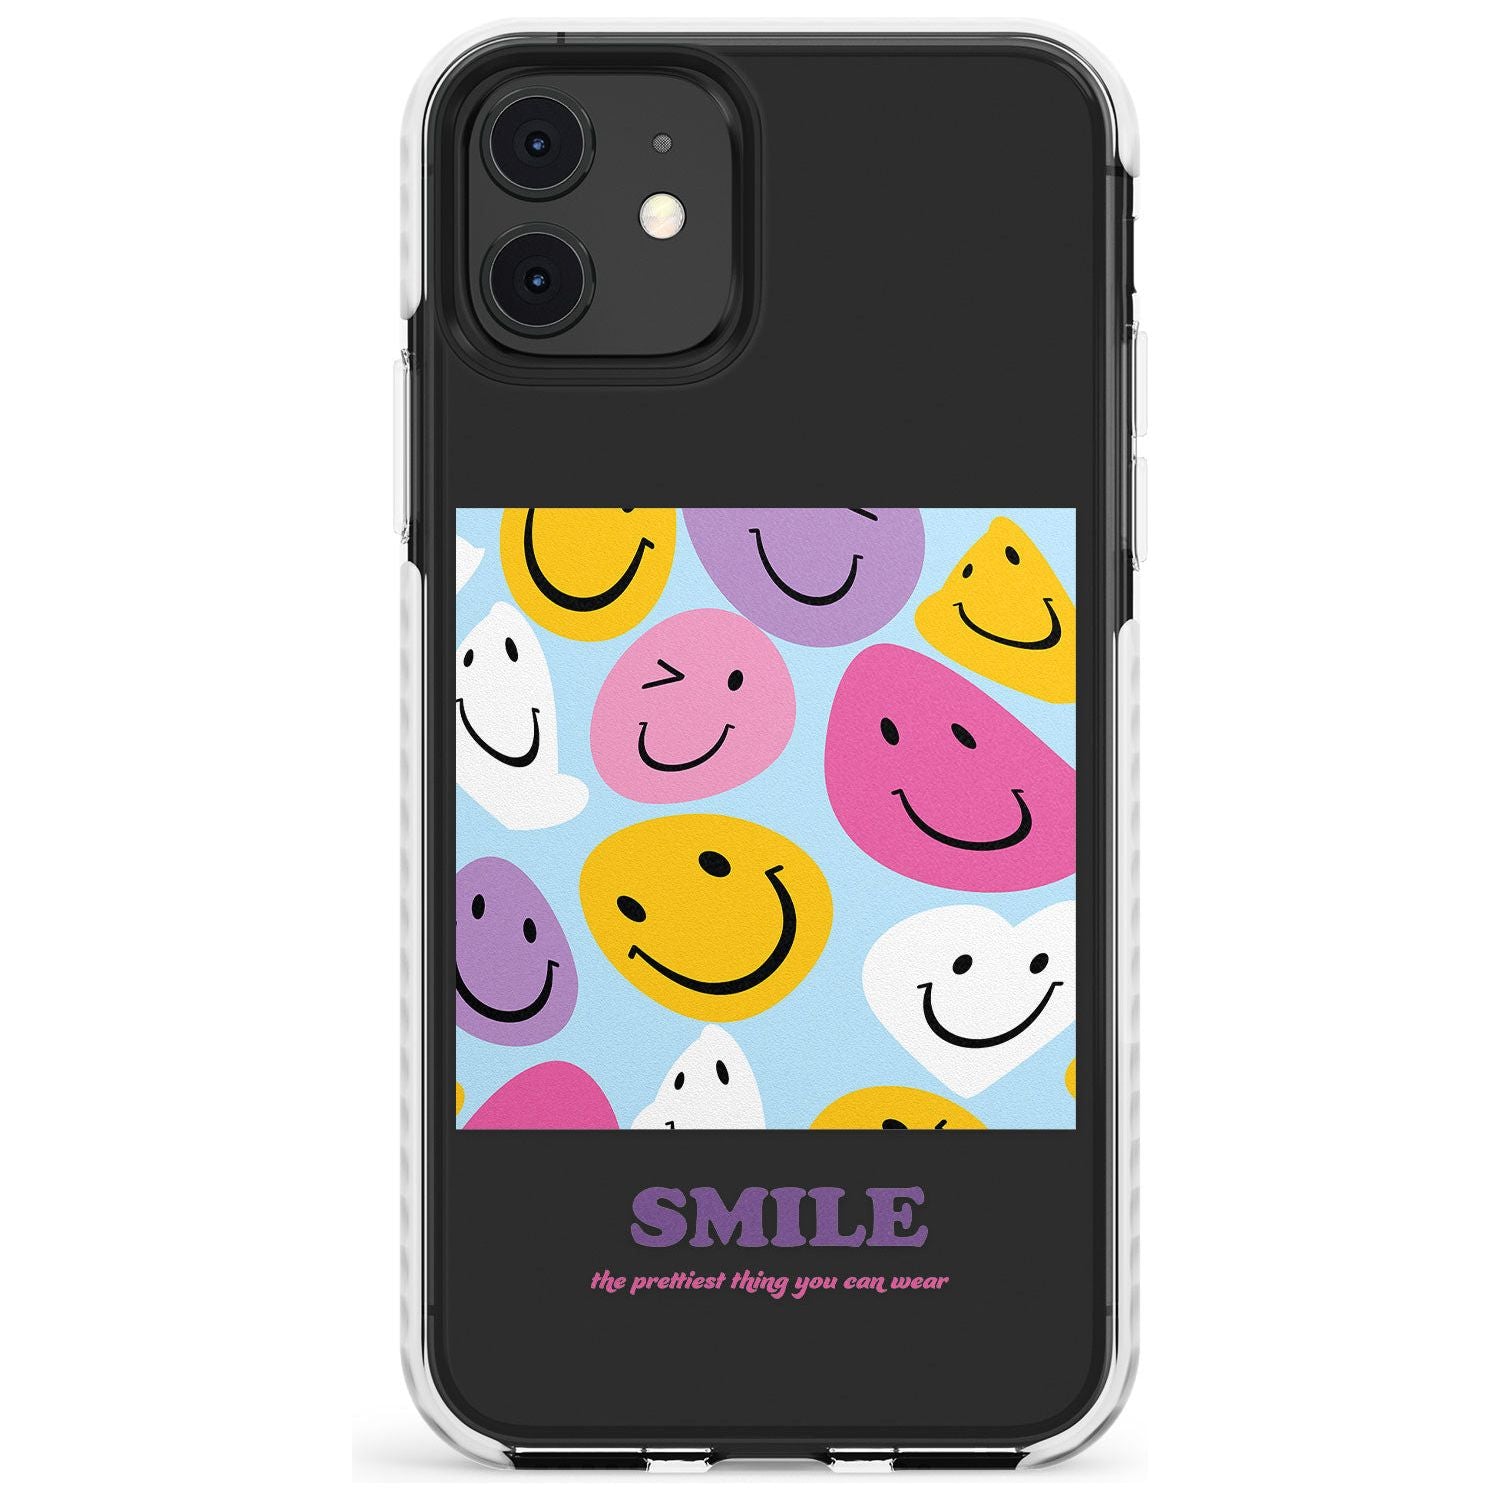 A Smile Impact Phone Case for iPhone 11